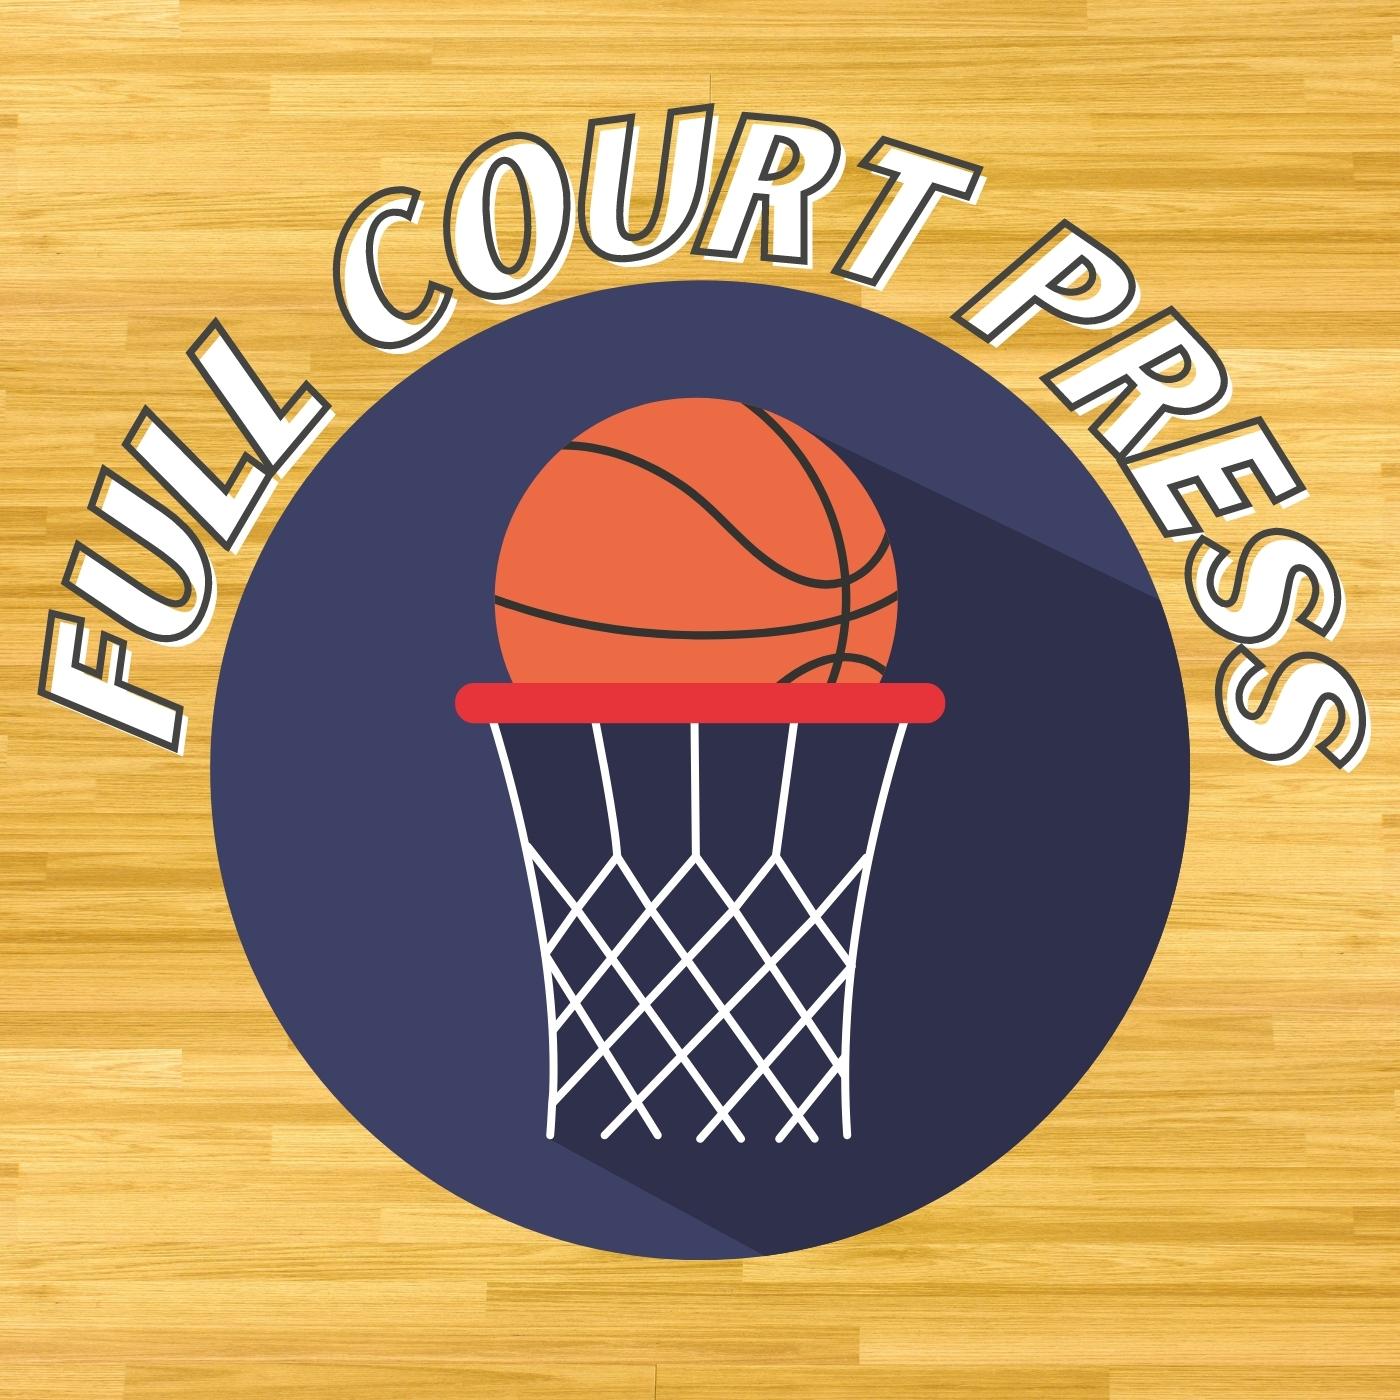 Full Court Press S02.E12: Ranking the Greatest Centers and 6th Men of All-Time